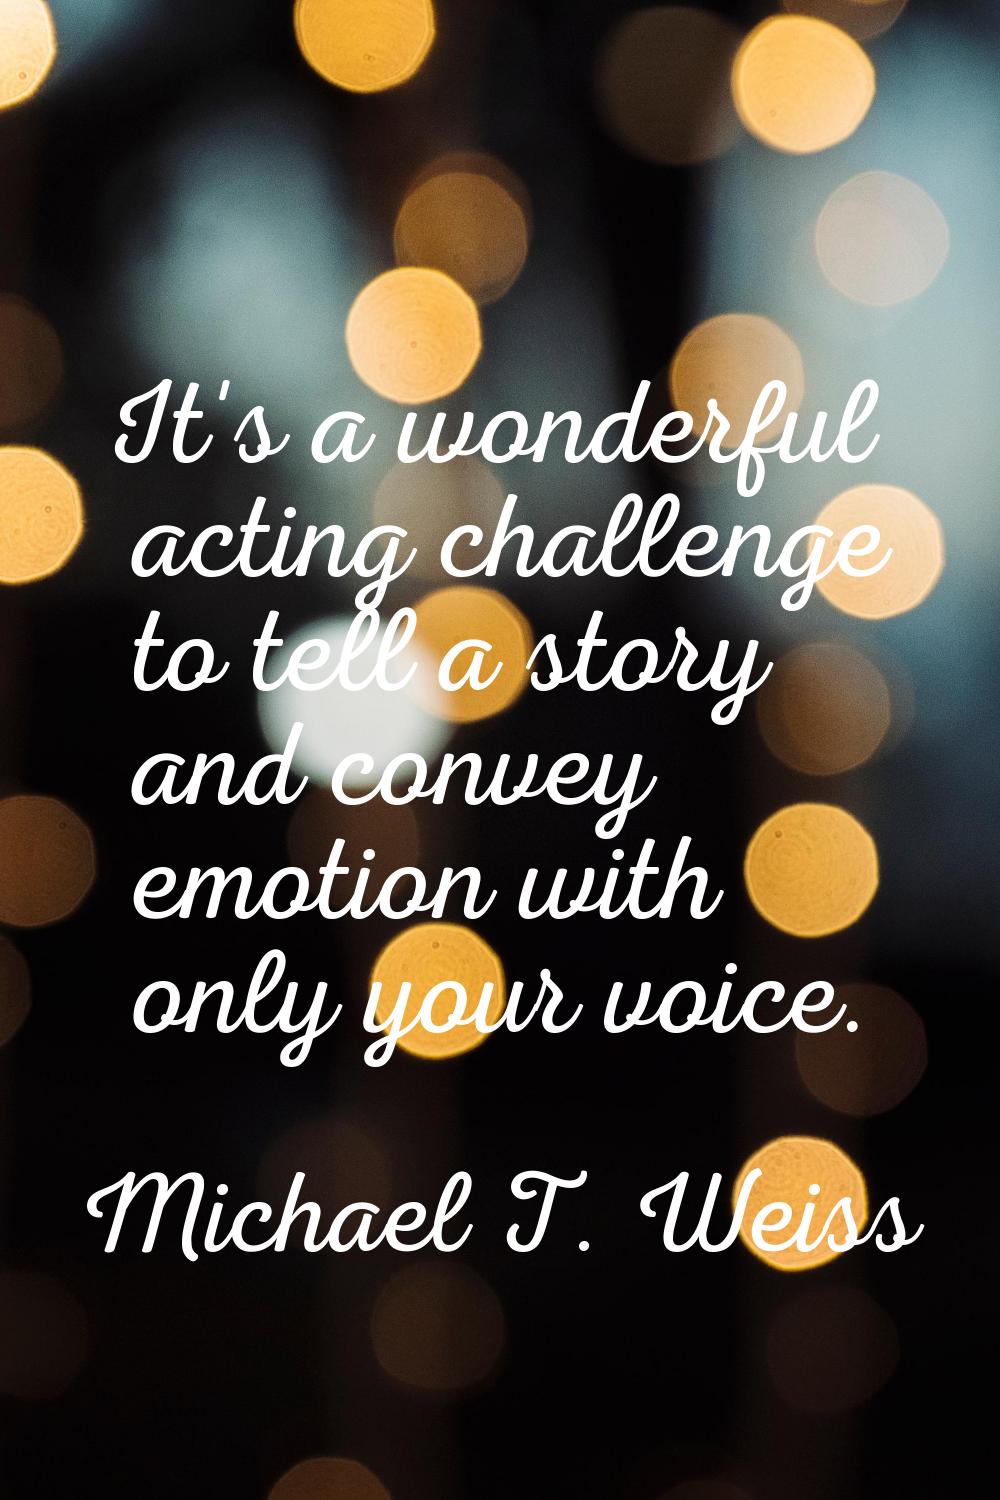 It's a wonderful acting challenge to tell a story and convey emotion with only your voice.